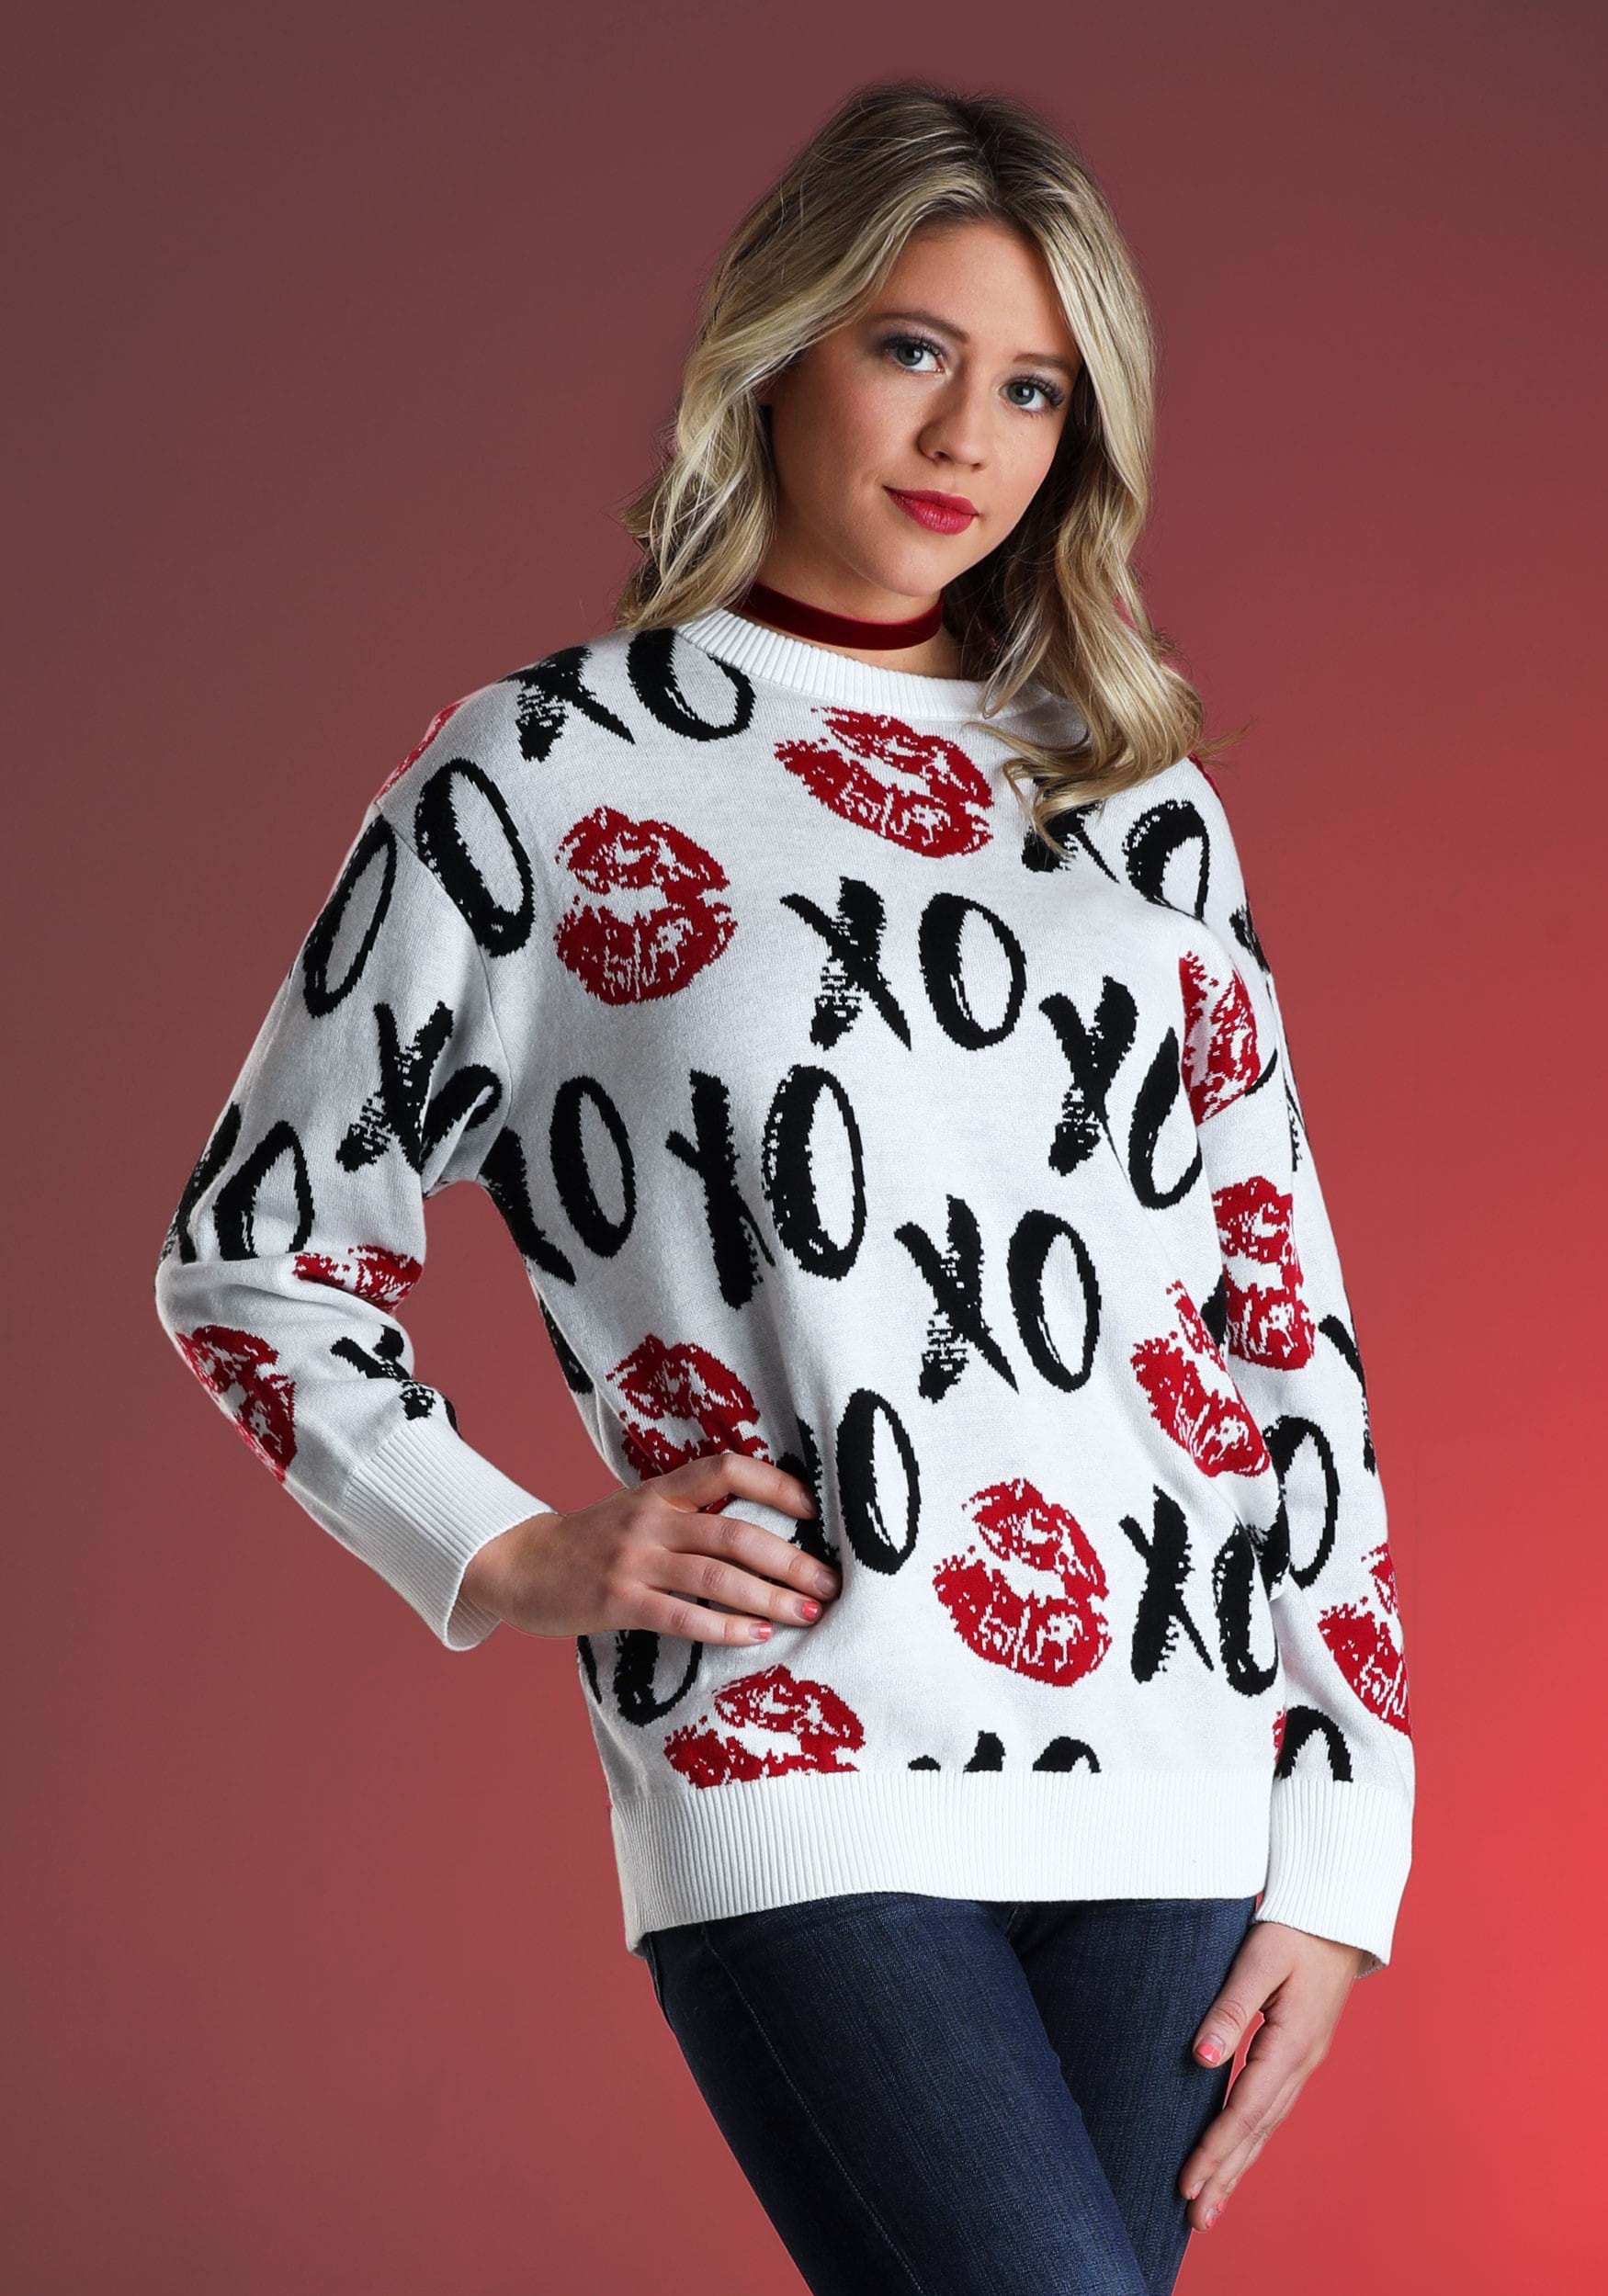 Hugs and Kisses Valentine’s Day Sweater for Adults